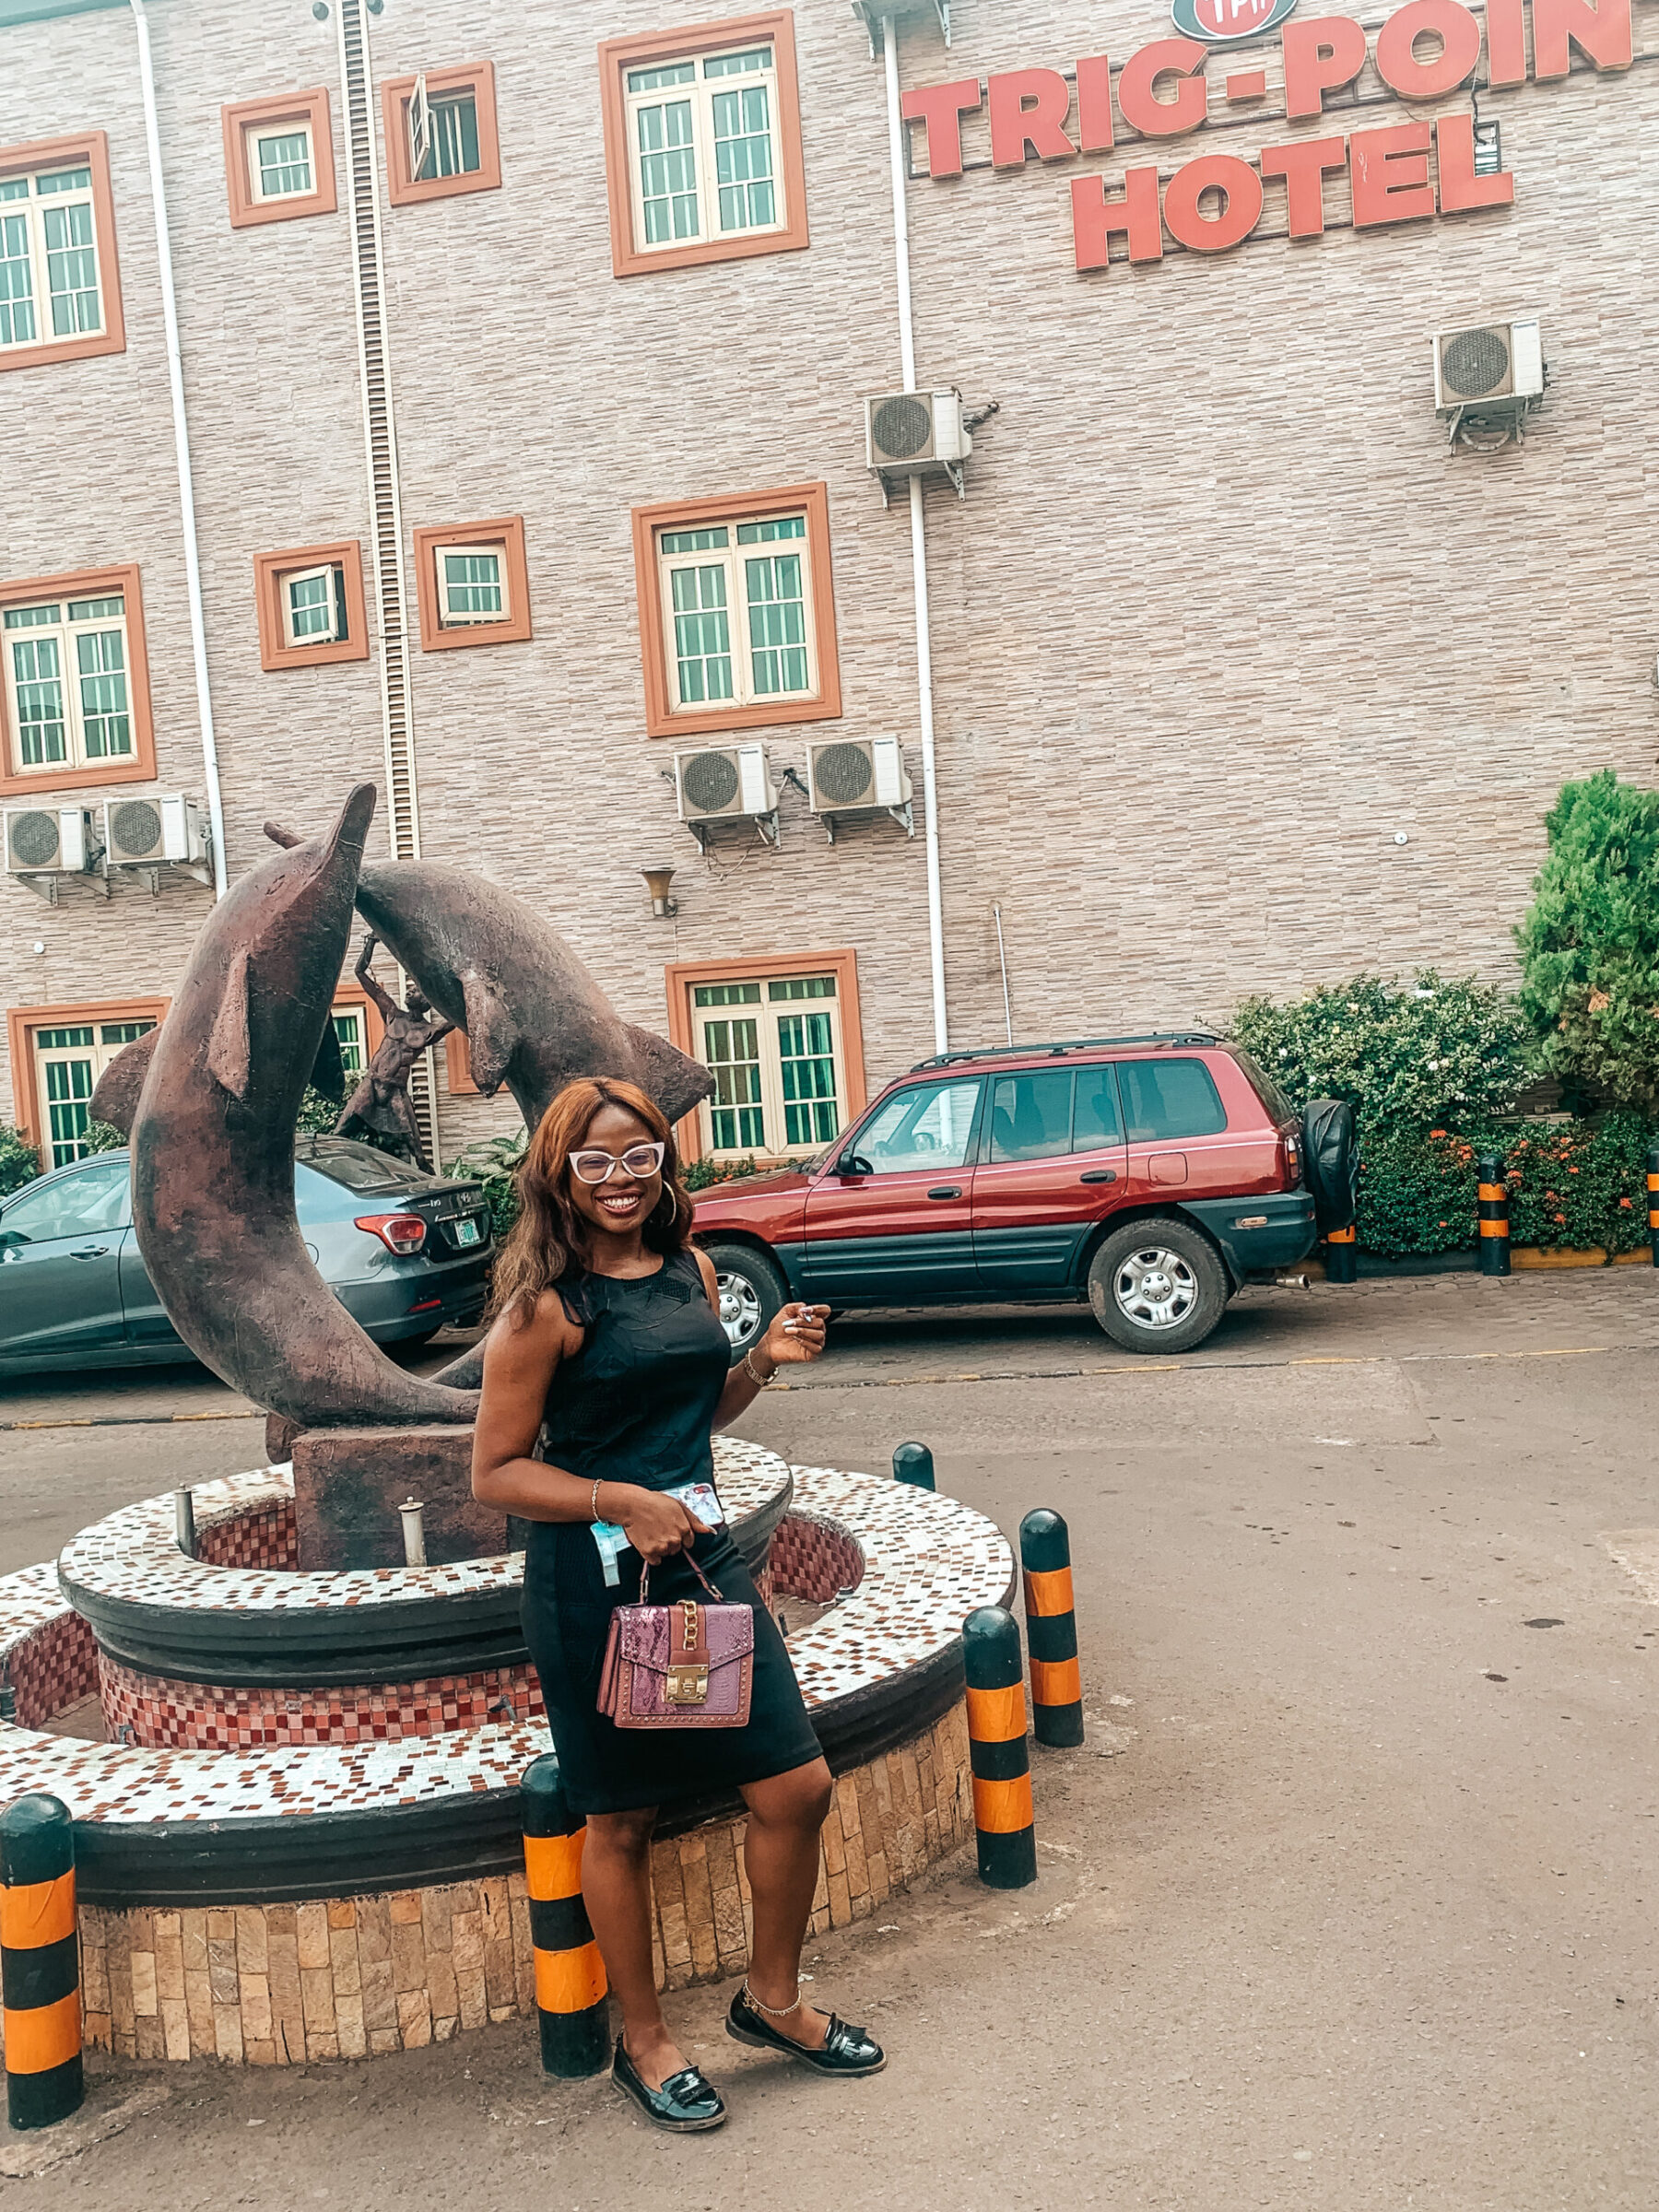 Iruoma at Trig point hotel, Awka. A fun place to visit in Awka.